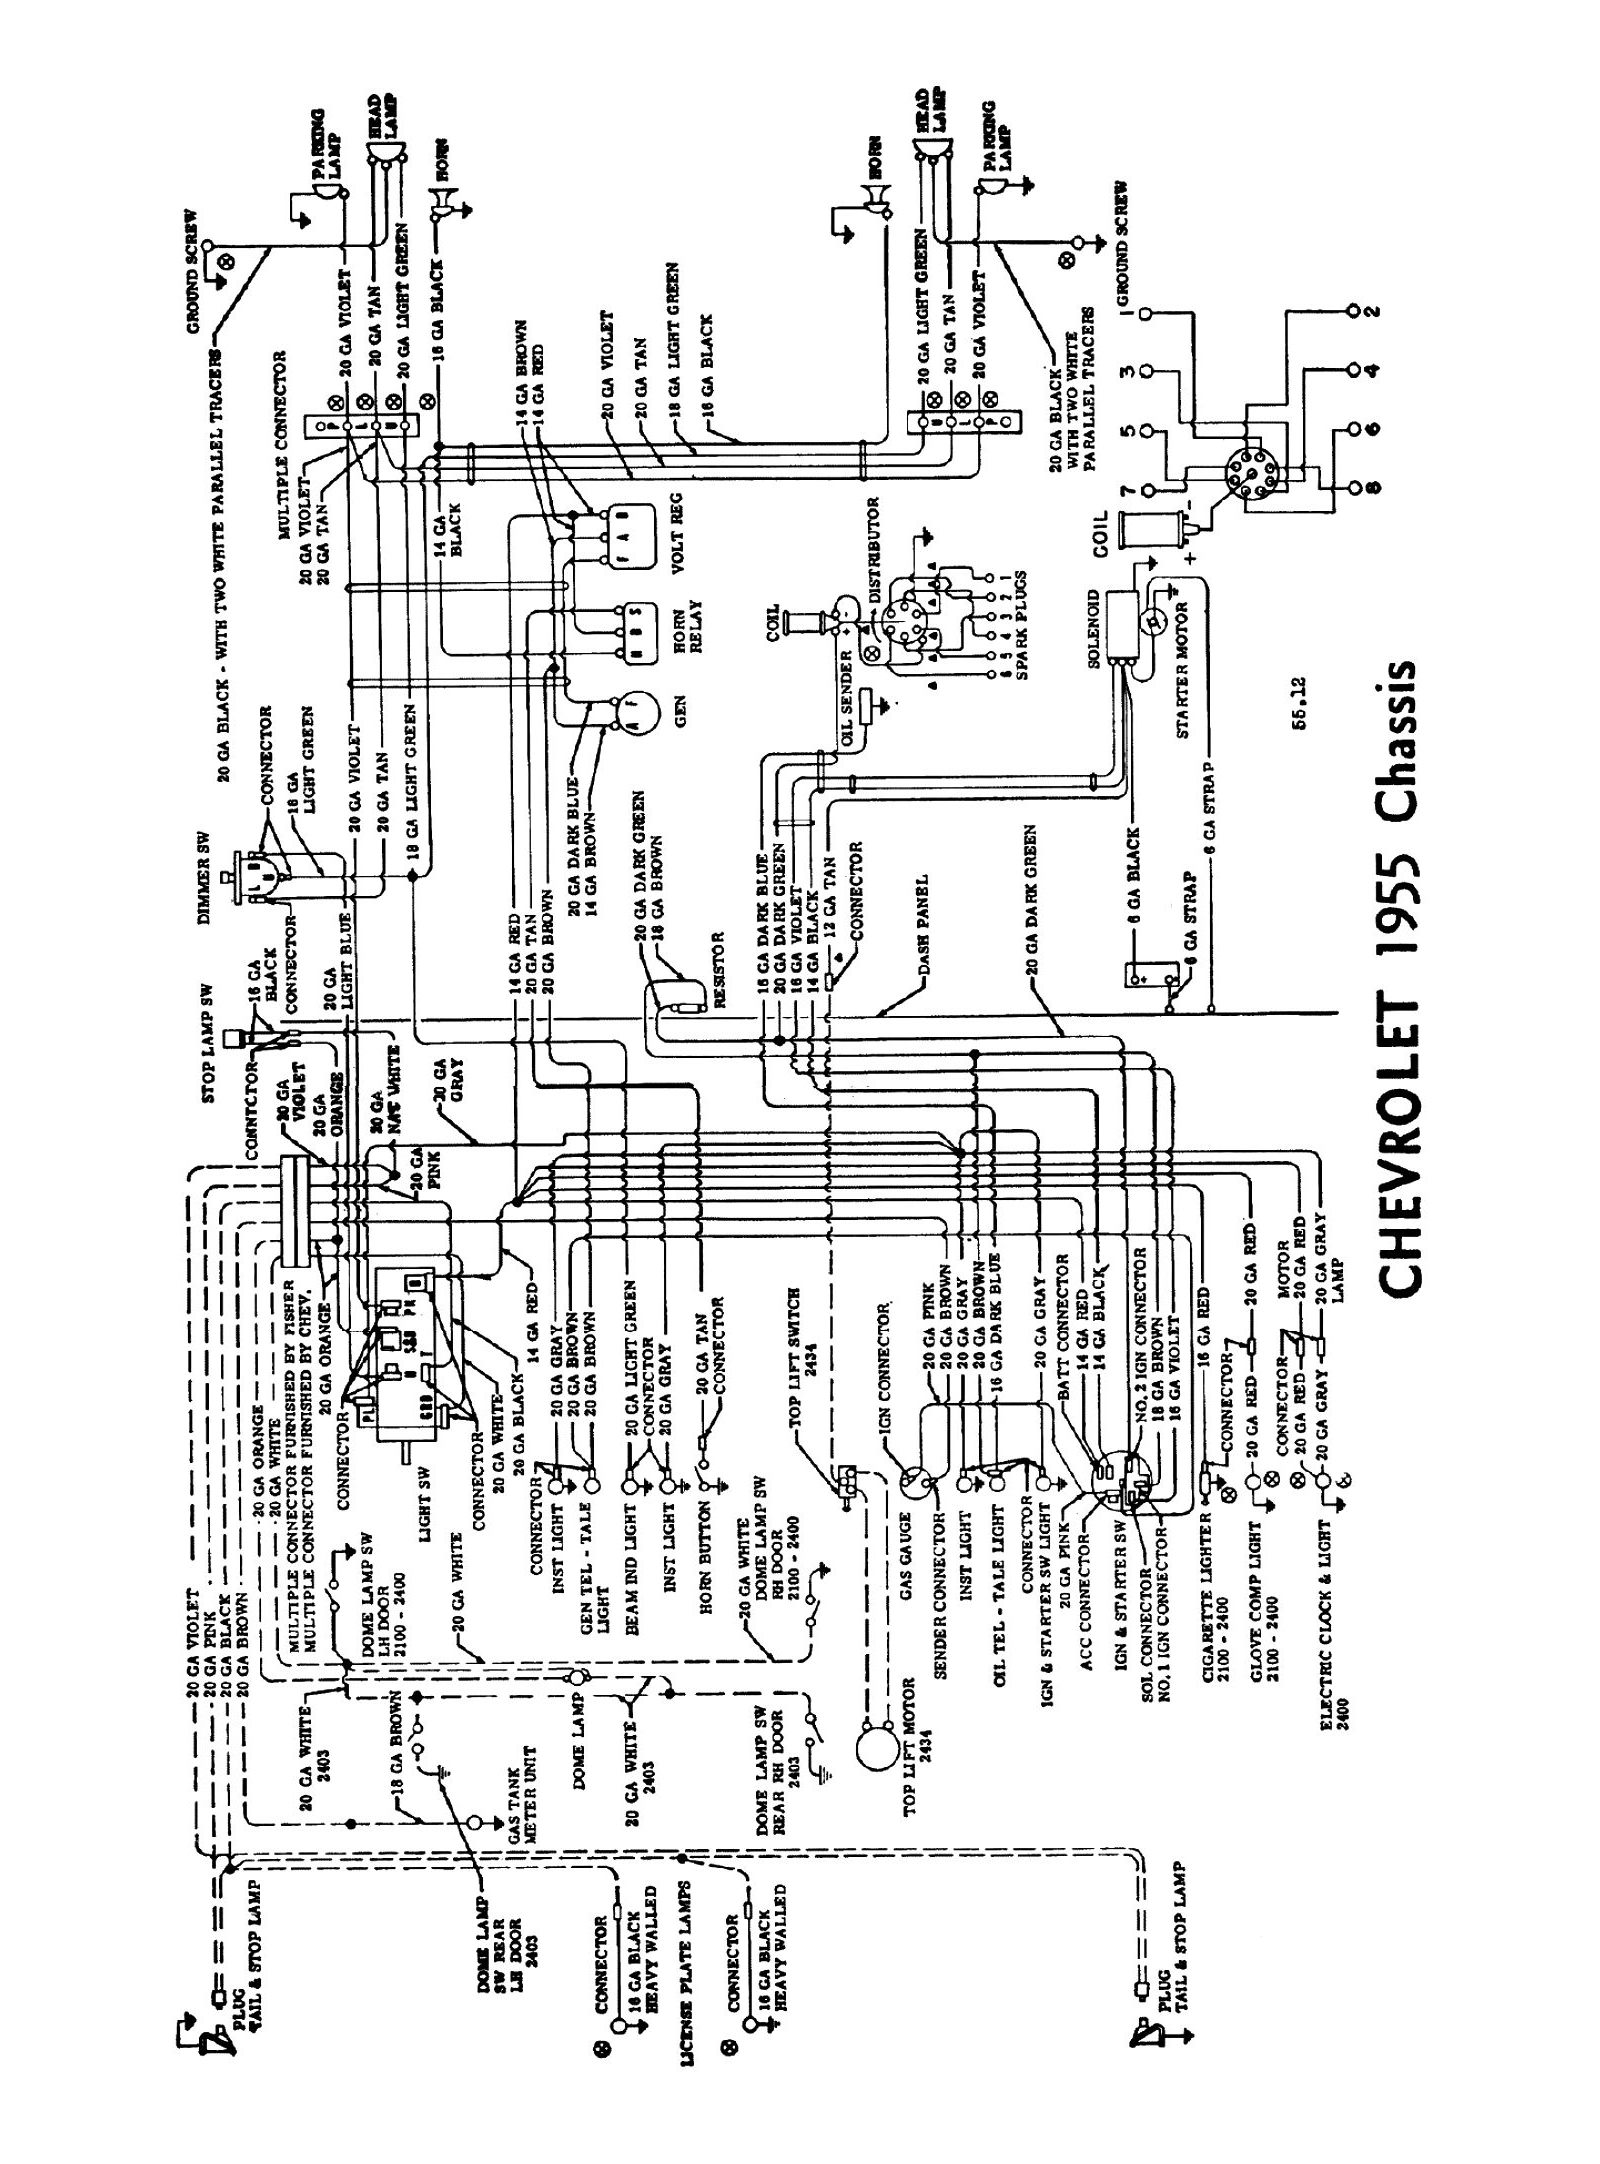 Chevy Wiring diagrams Chevy Neutral Safety Switch Wiring Diagram Old Online Chevy Manuals